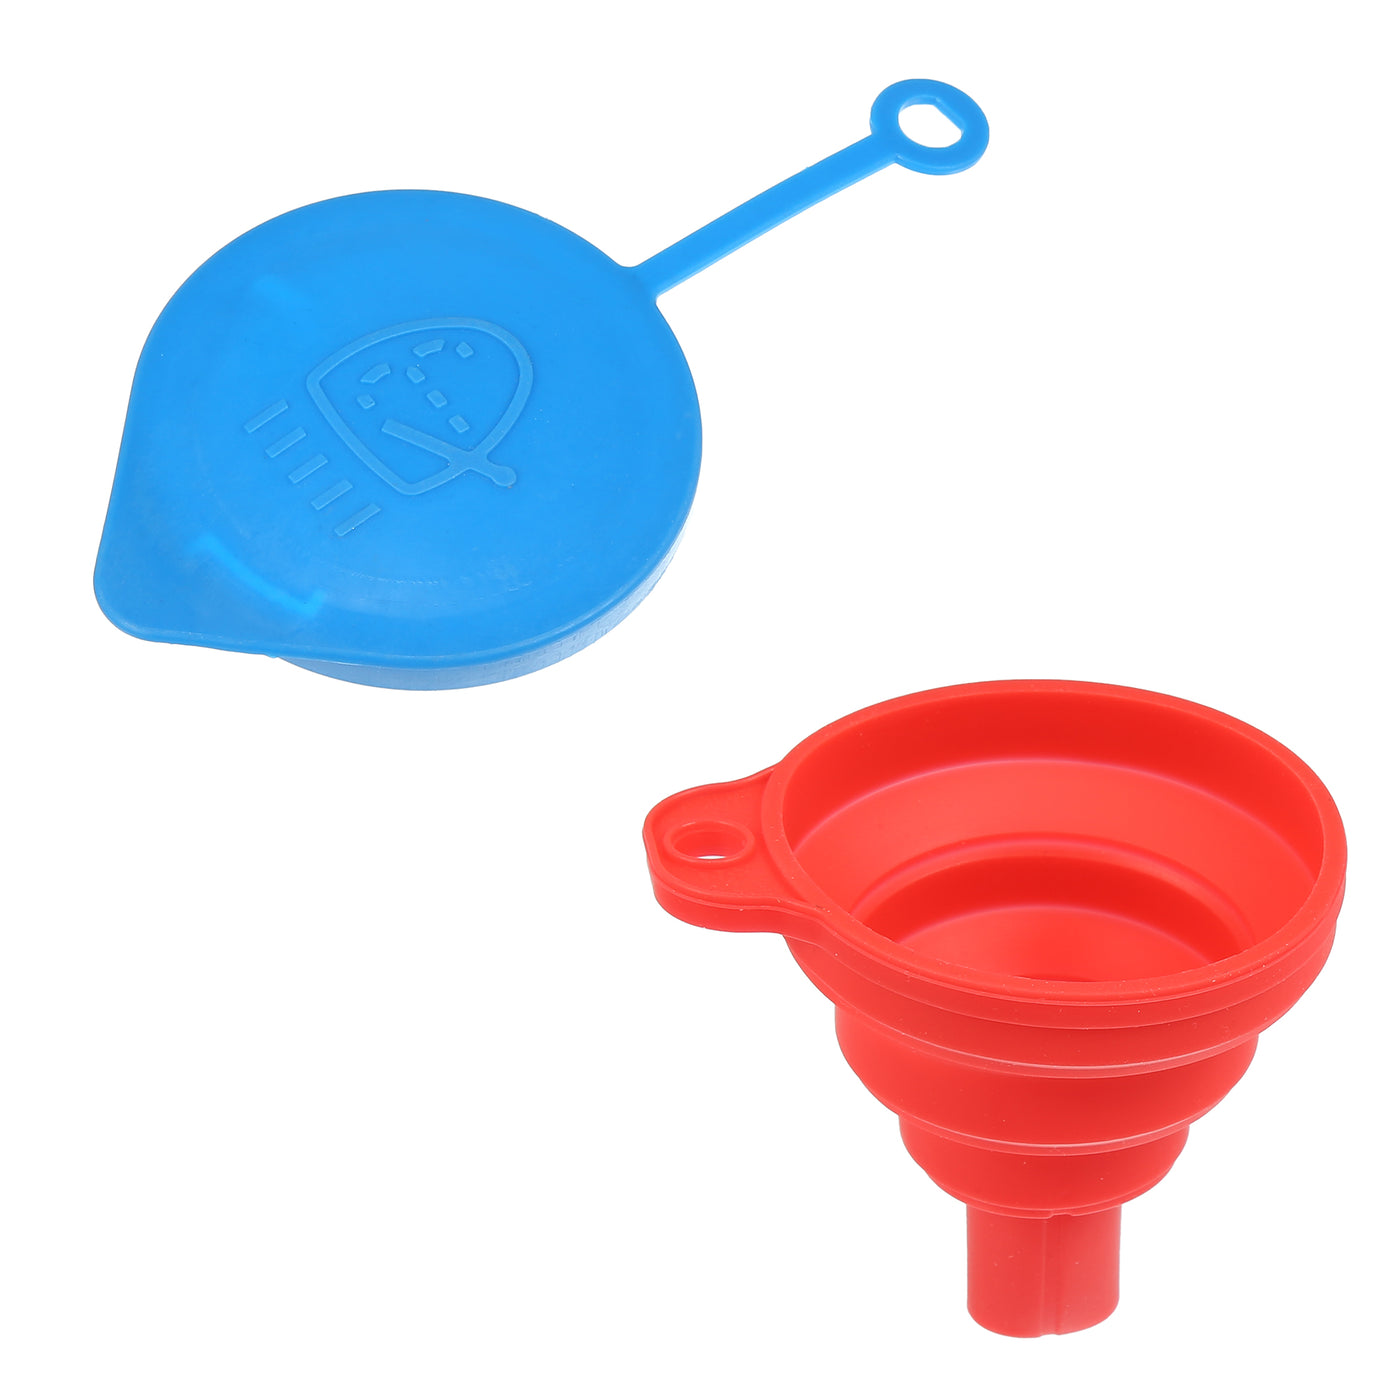 X AUTOHAUX Windshield Washer Fluid Reservoir Bottle Tank Cap with Rubber Water Funnel Set for Honda Civic Replace 38513-SB0-961